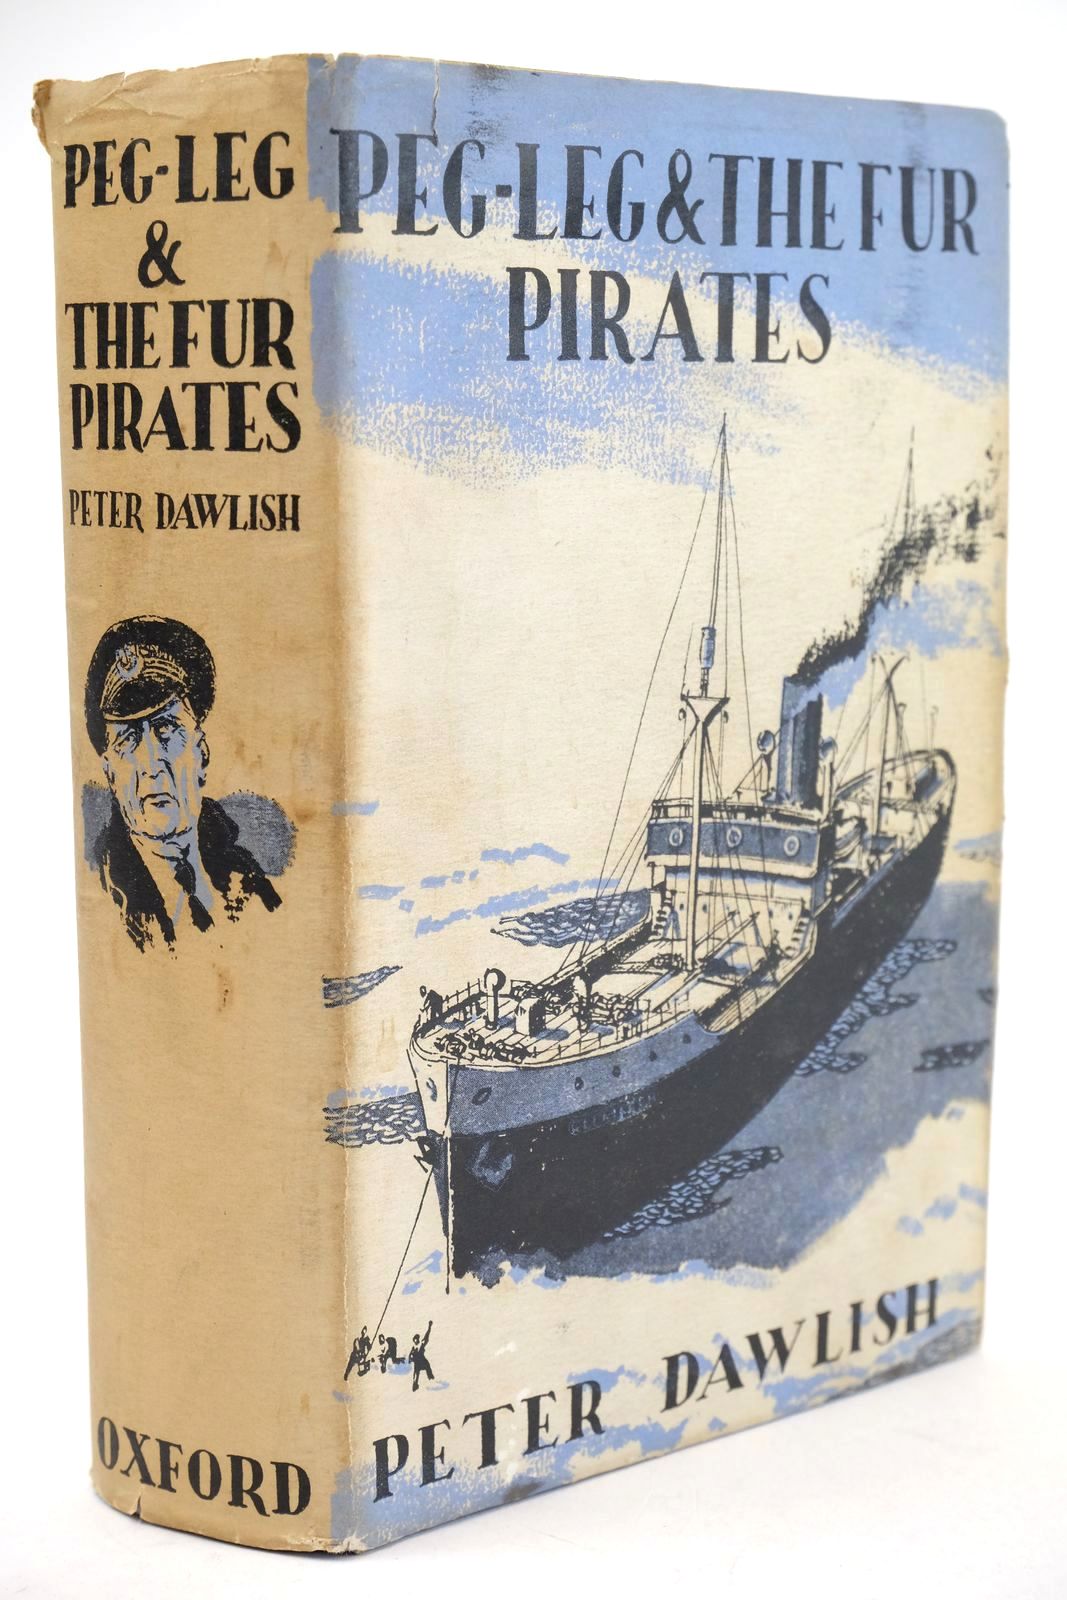 Photo of PEG-LEG AND THE FUR PIRATES written by Dawlish, Peter illustrated by Hepple, Norman published by Oxford University Press (STOCK CODE: 1325332)  for sale by Stella & Rose's Books